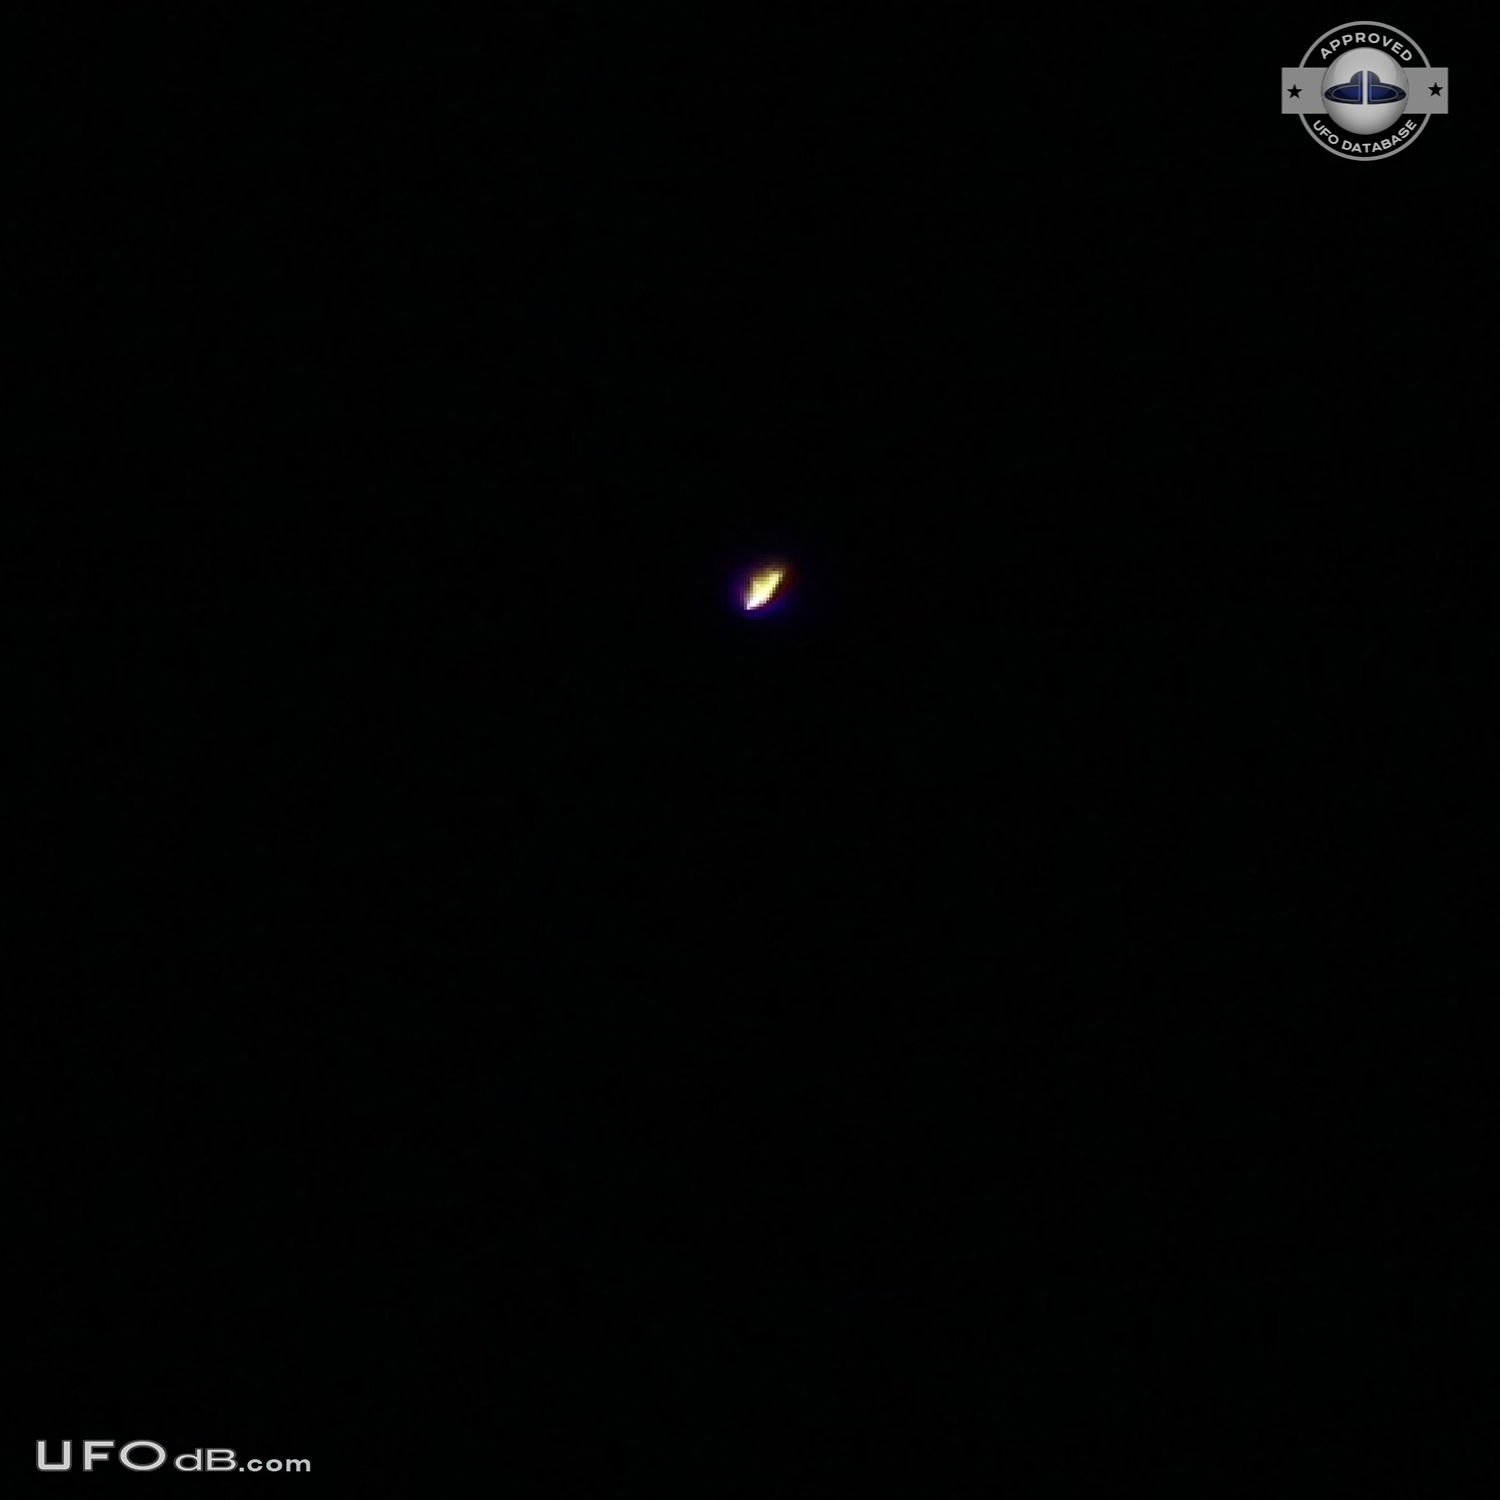 Bright mufti-colored flashing pulsating UFO on pictures - Florida 2012 UFO Picture #524-1